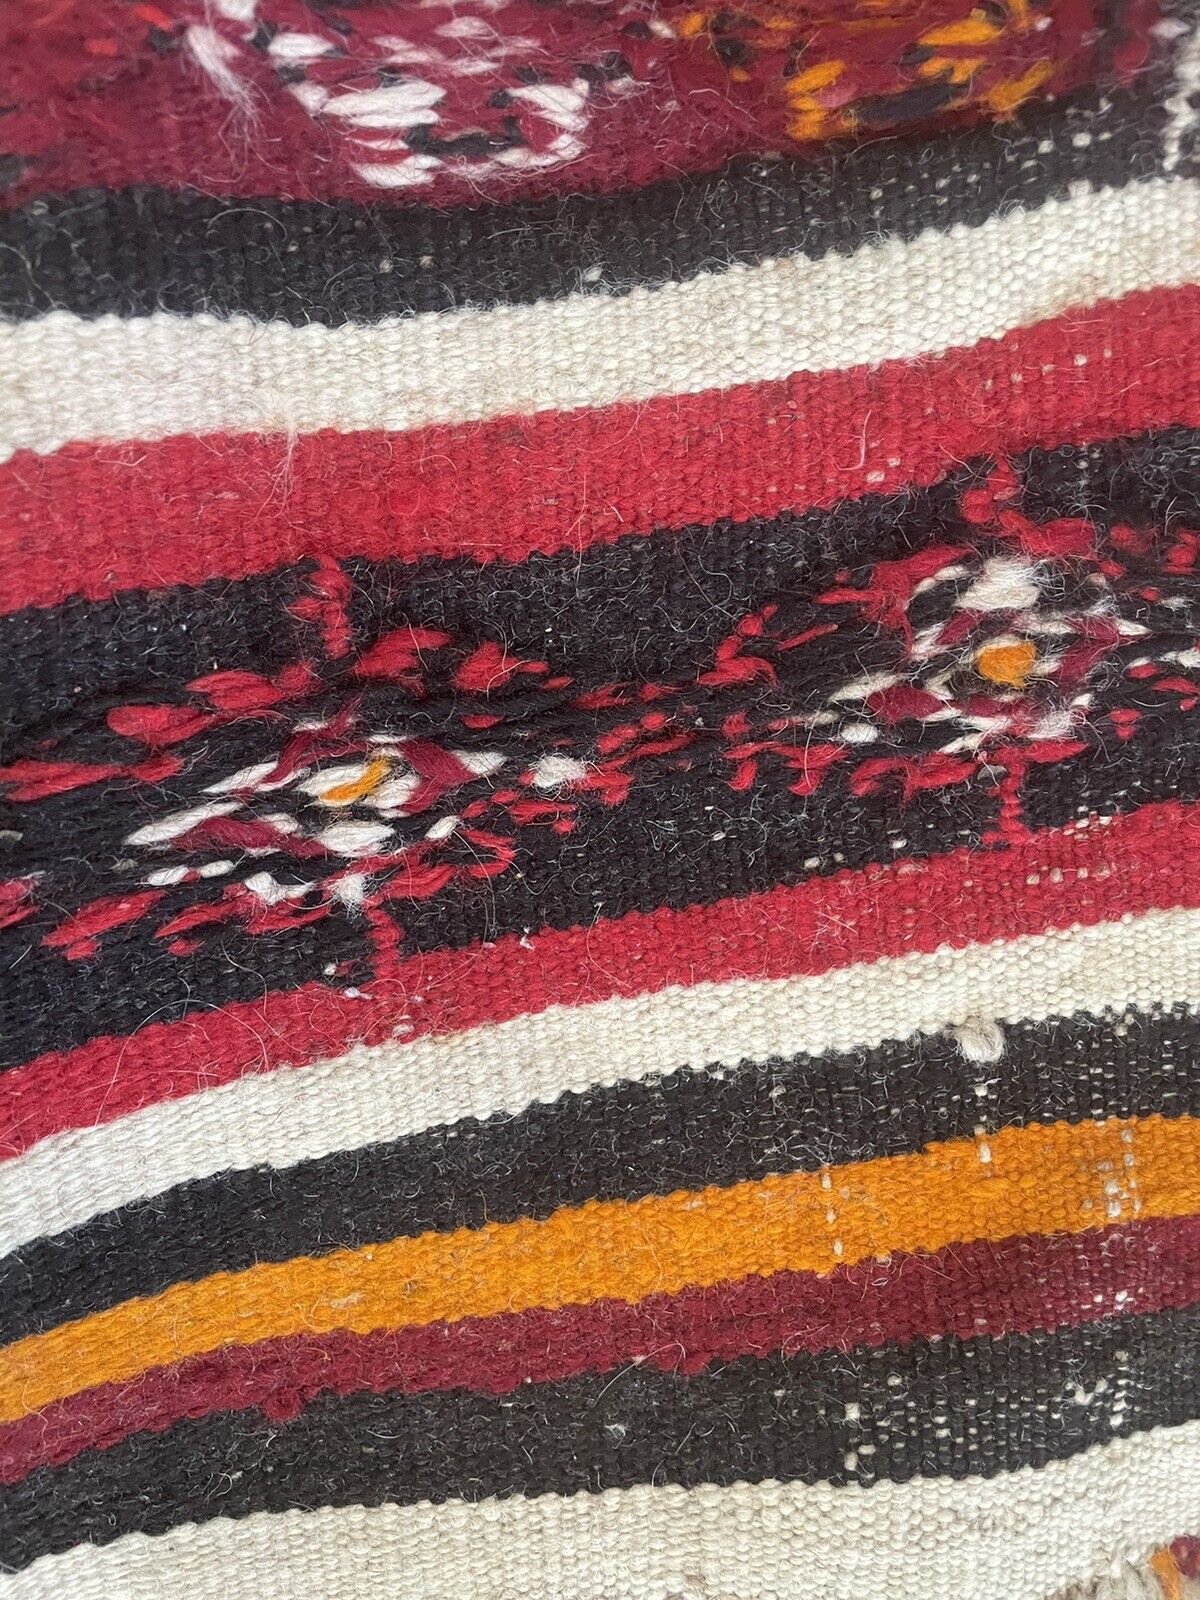 Close-up of character on Handmade Antique Moroccan Berber Kilim Rug - Detailed view showcasing the rug's character and charm, shaped by its age wear and unique design.